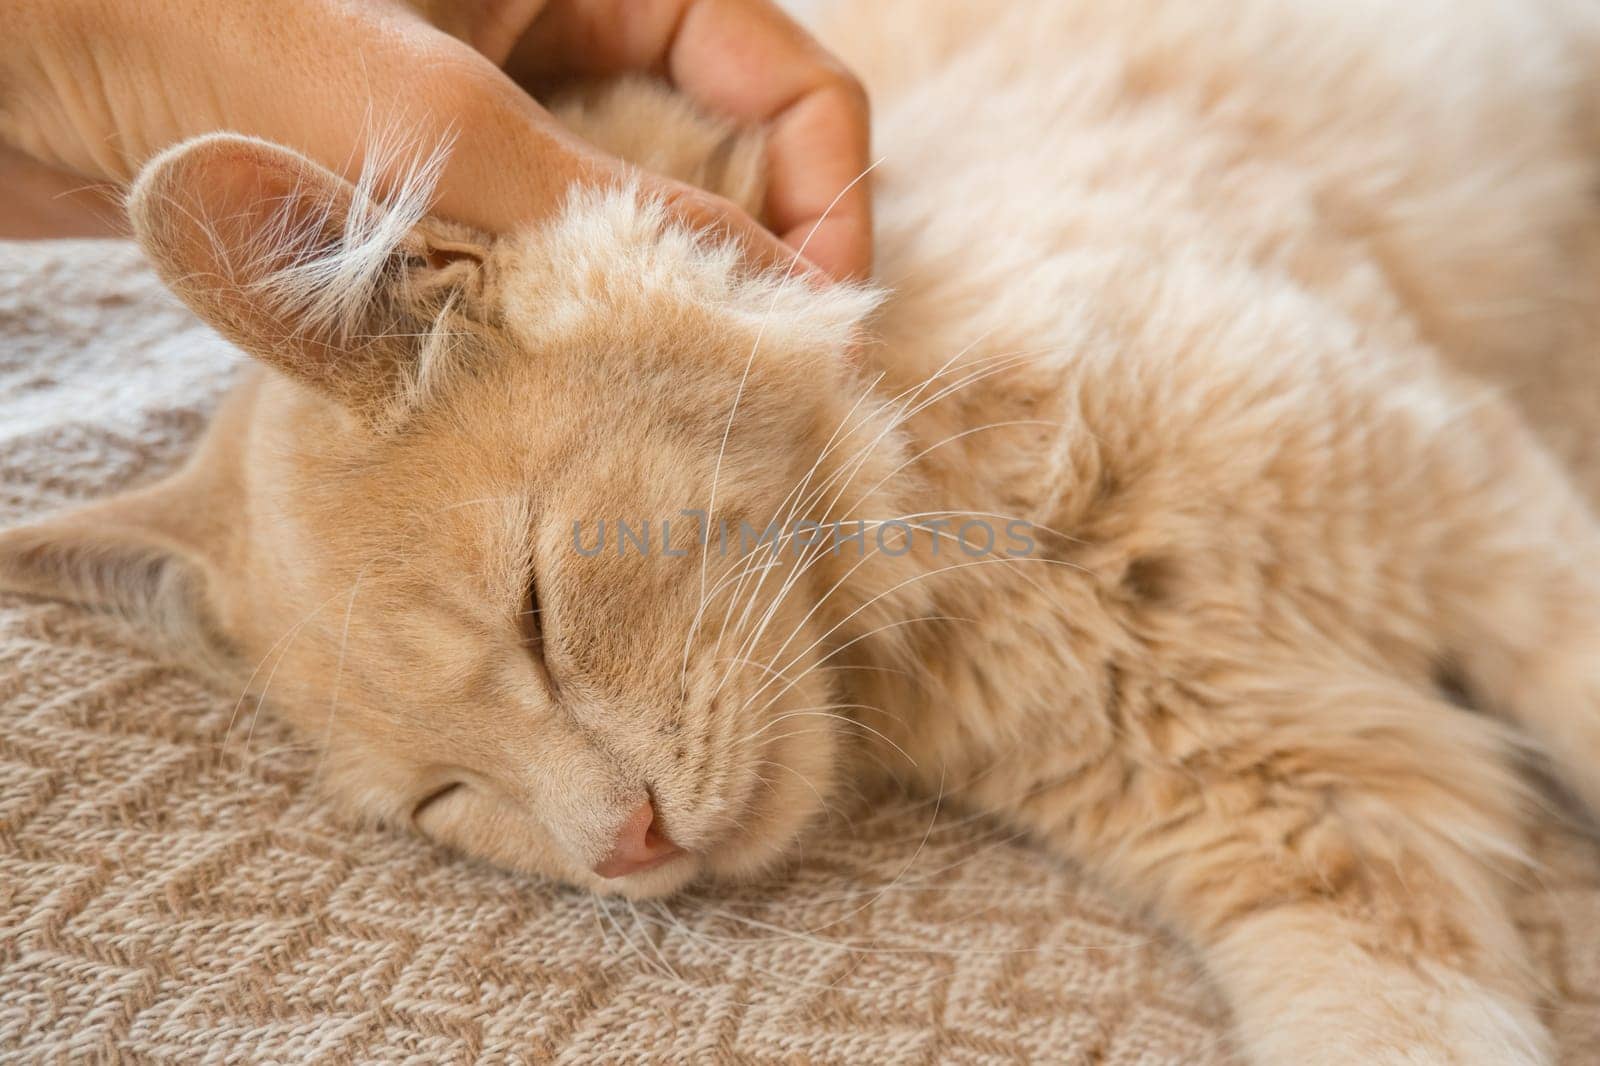 happy cat lovely comfortable sleeping by the woman stroking hand grip at . love to animals concept